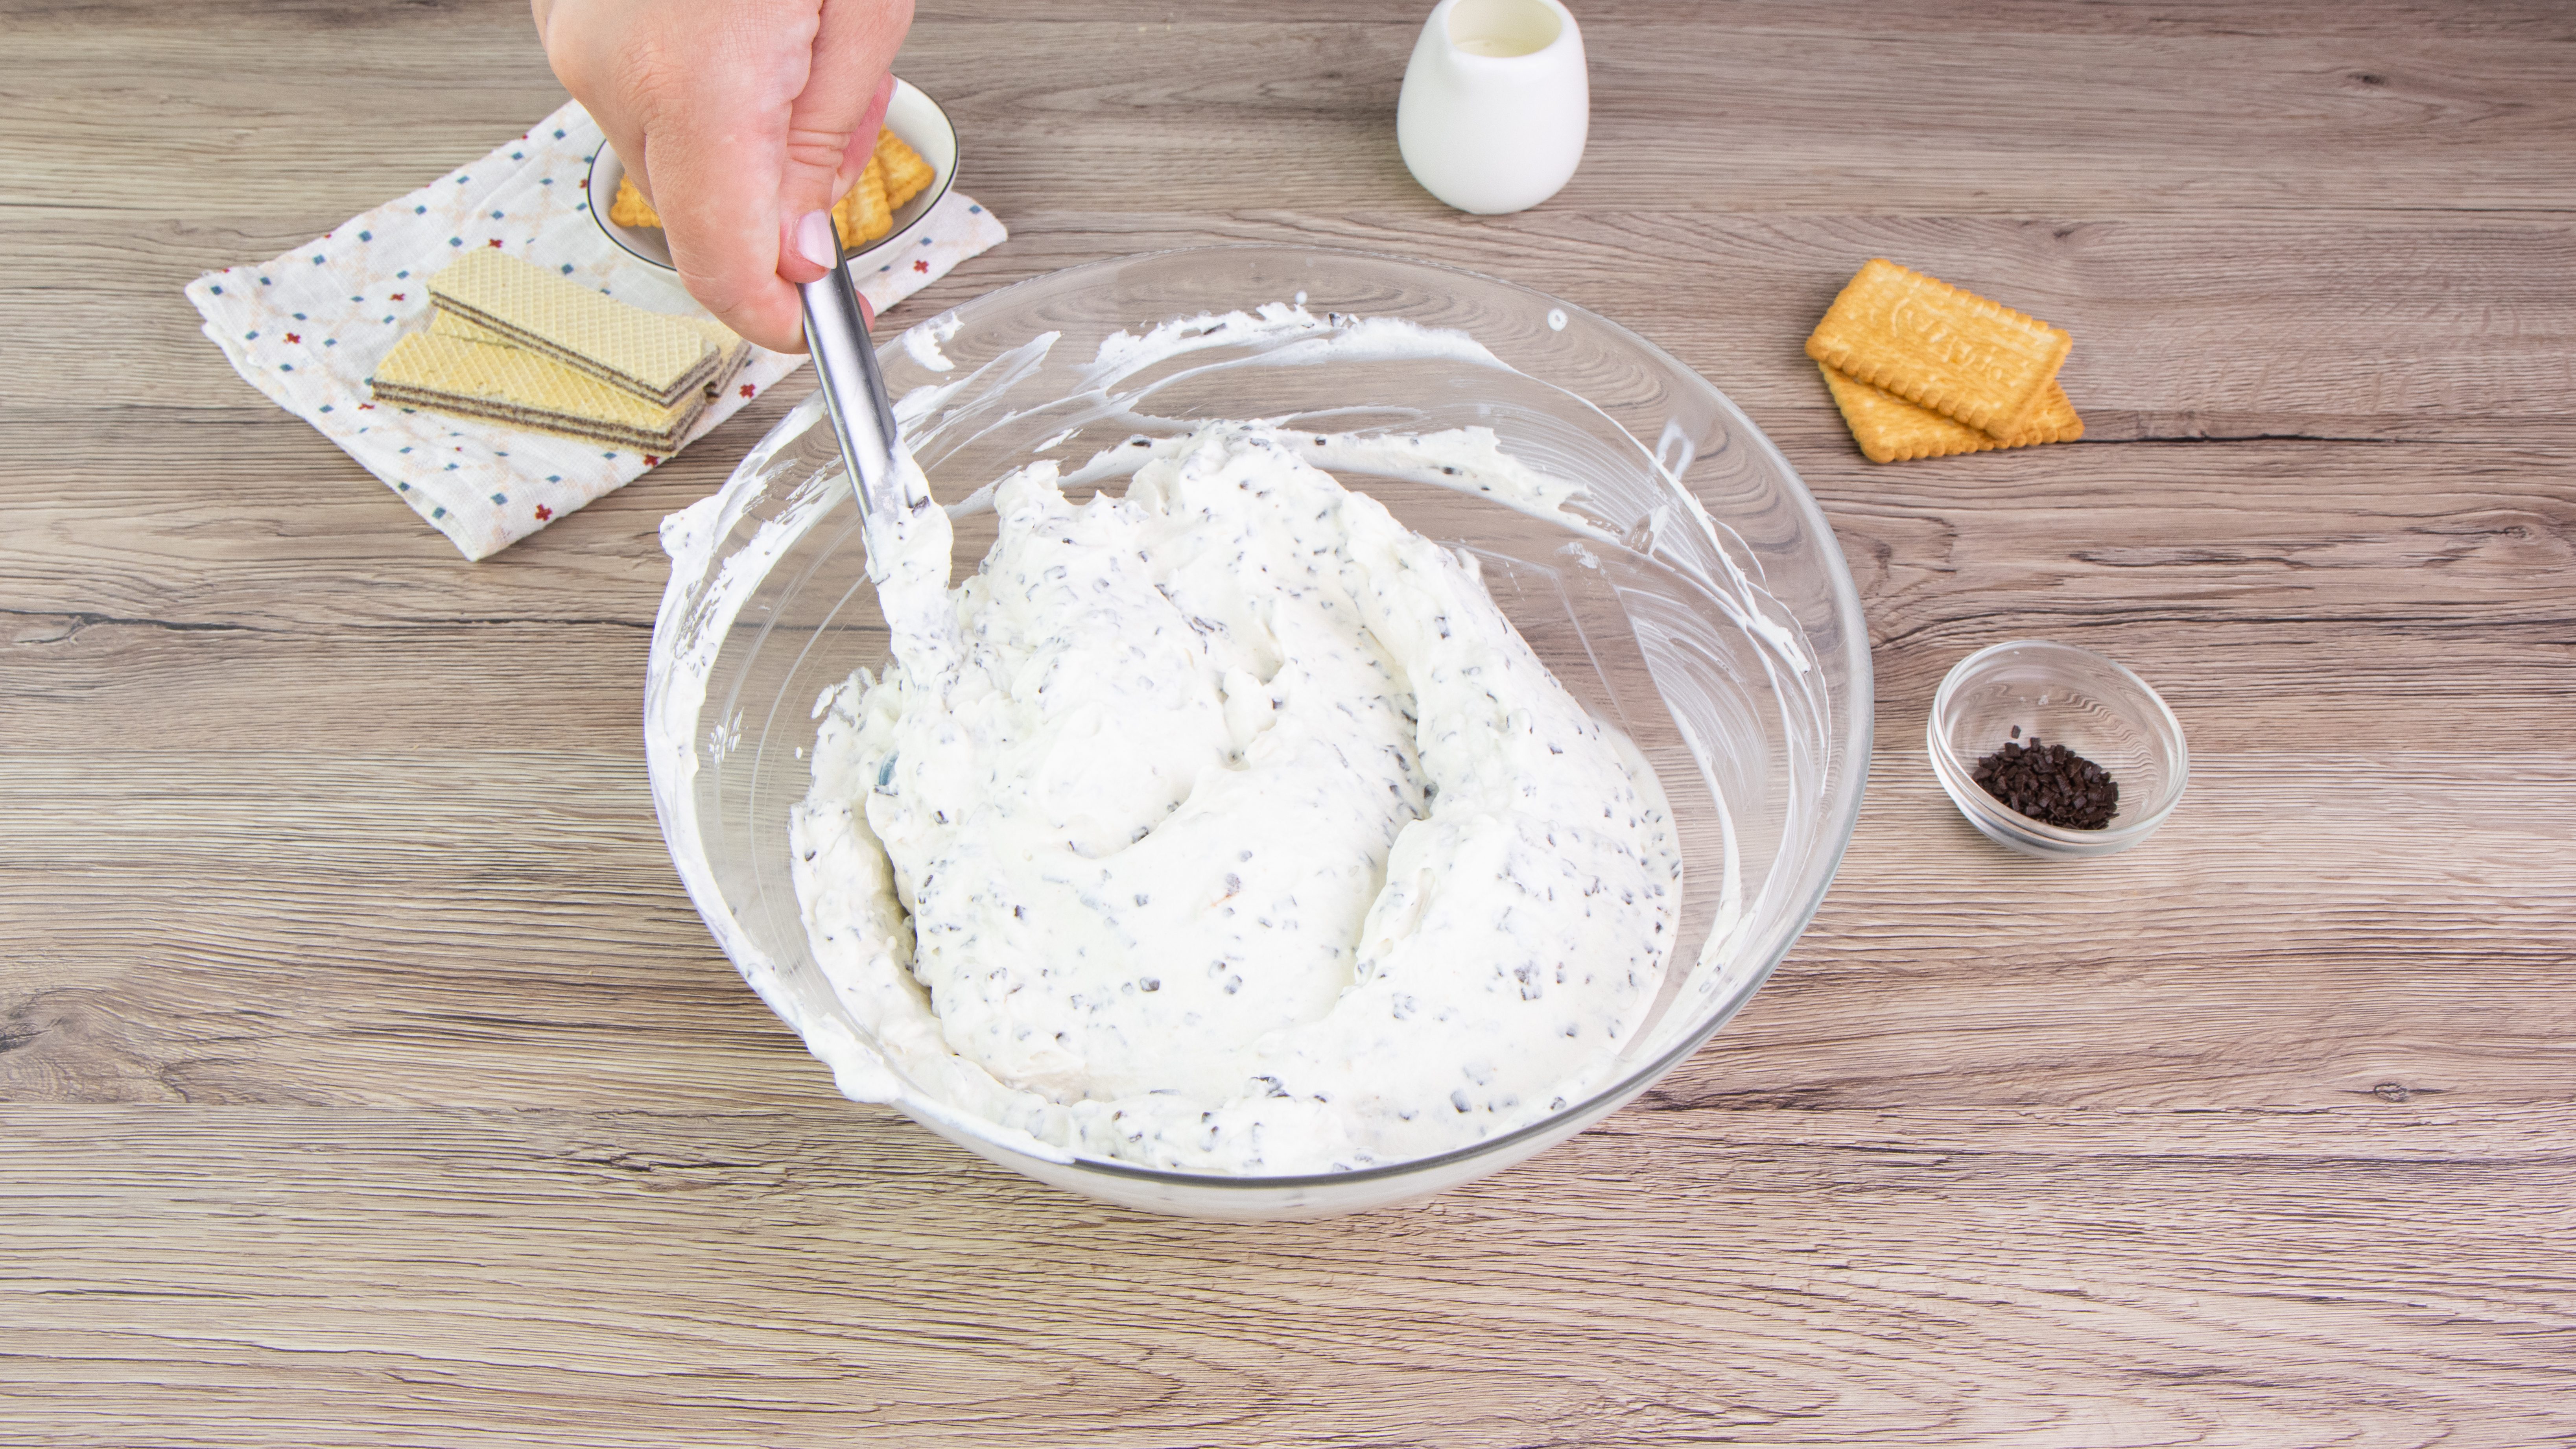 1659177051 542 Stracciatella ice cream biscuits the recipe for making them at - February 1, 2023